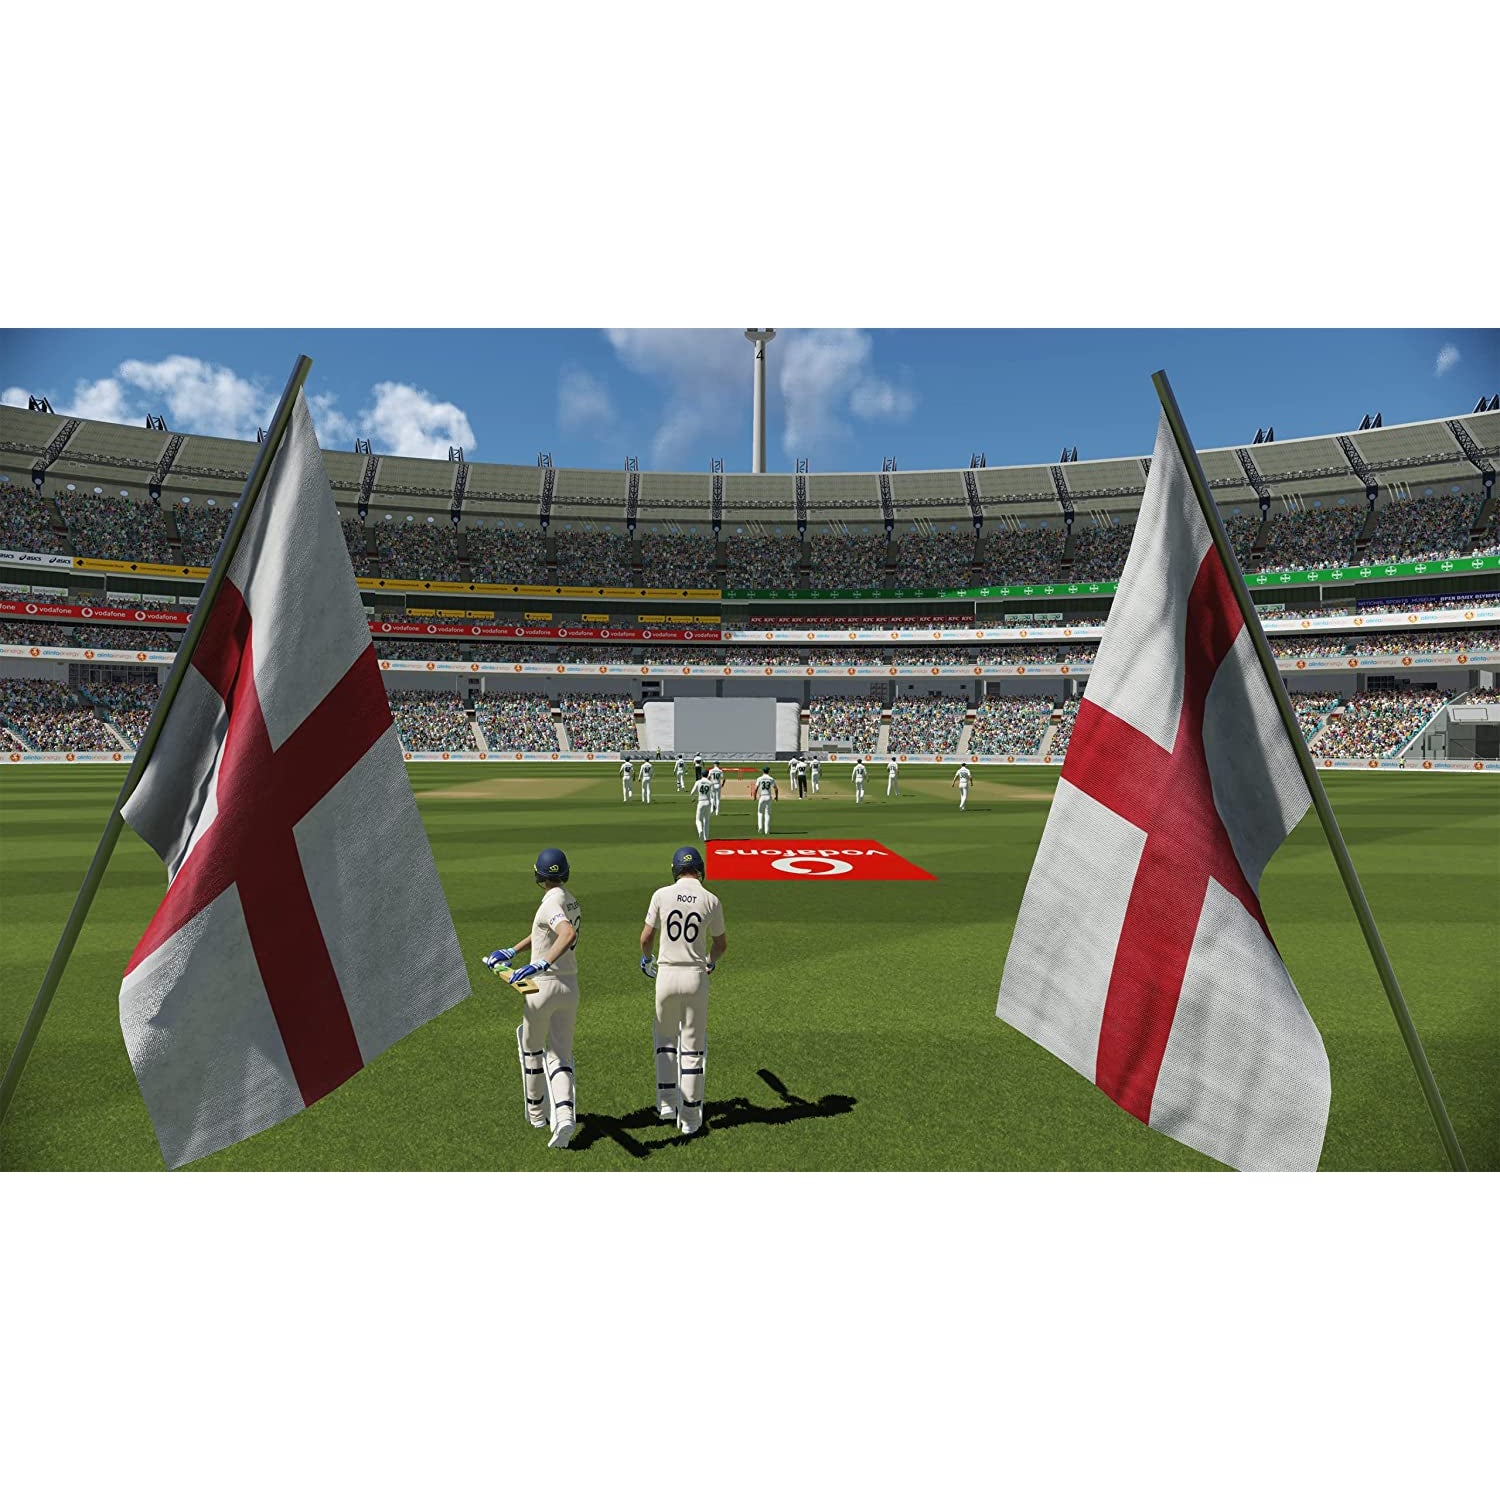 Cricket 22 - The Official Game of The Ashes (Xbox Series X/Xbox One)